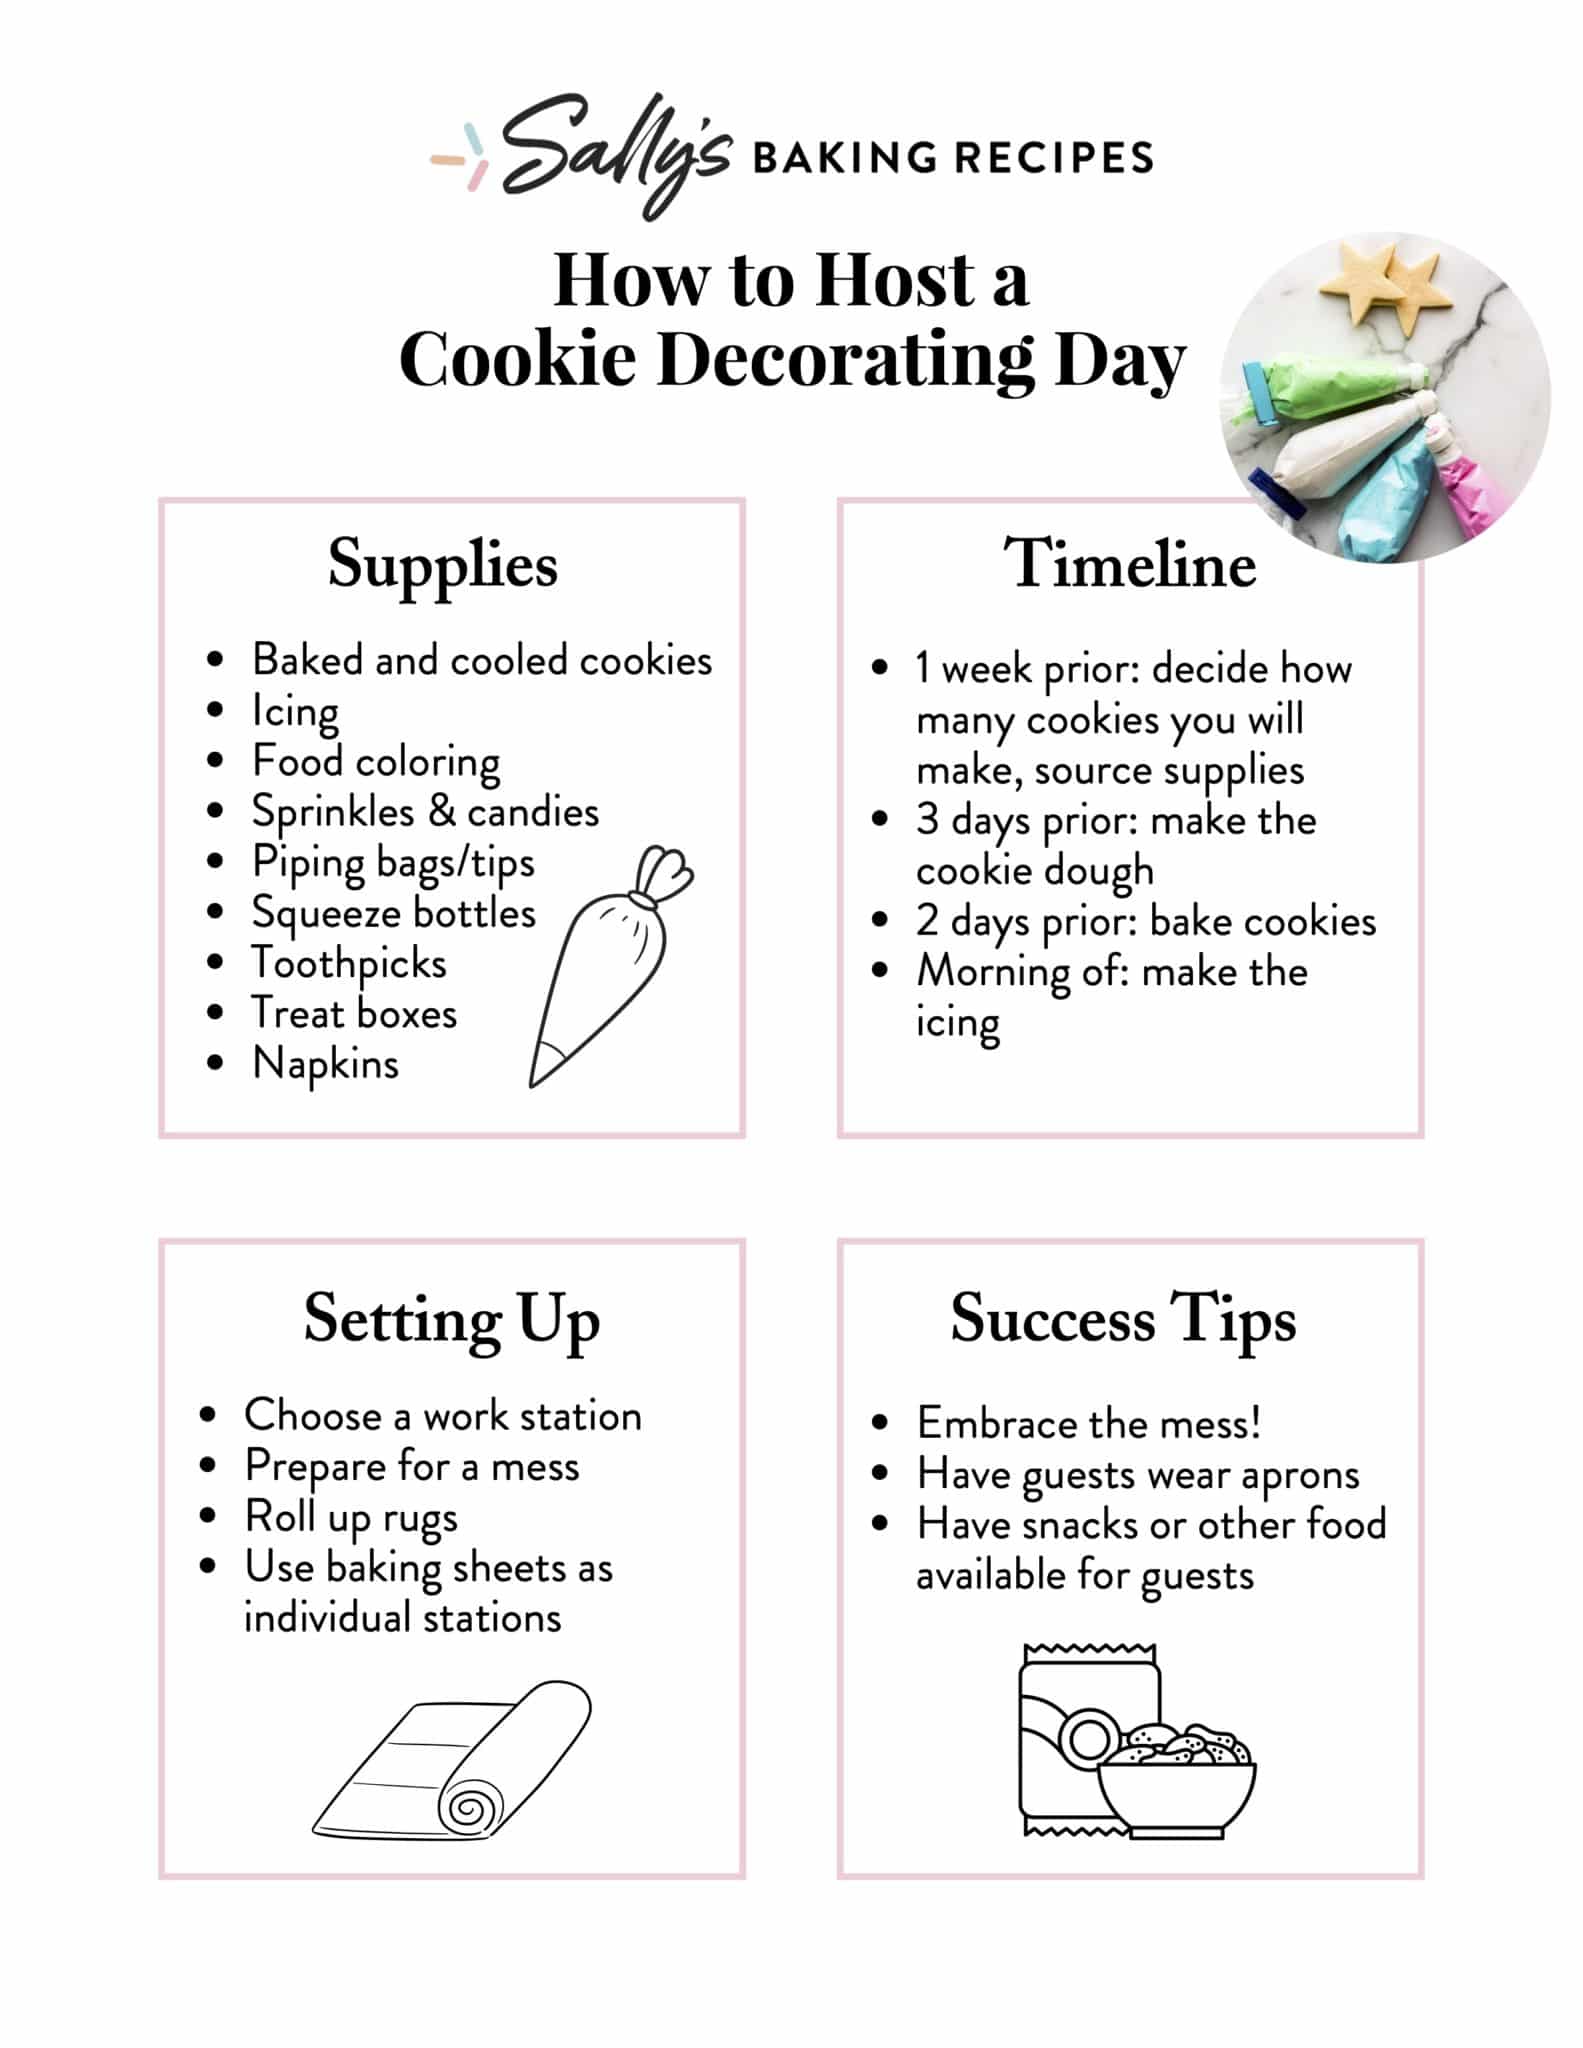 printable page with listed information about preparing for a cookie decorating day.